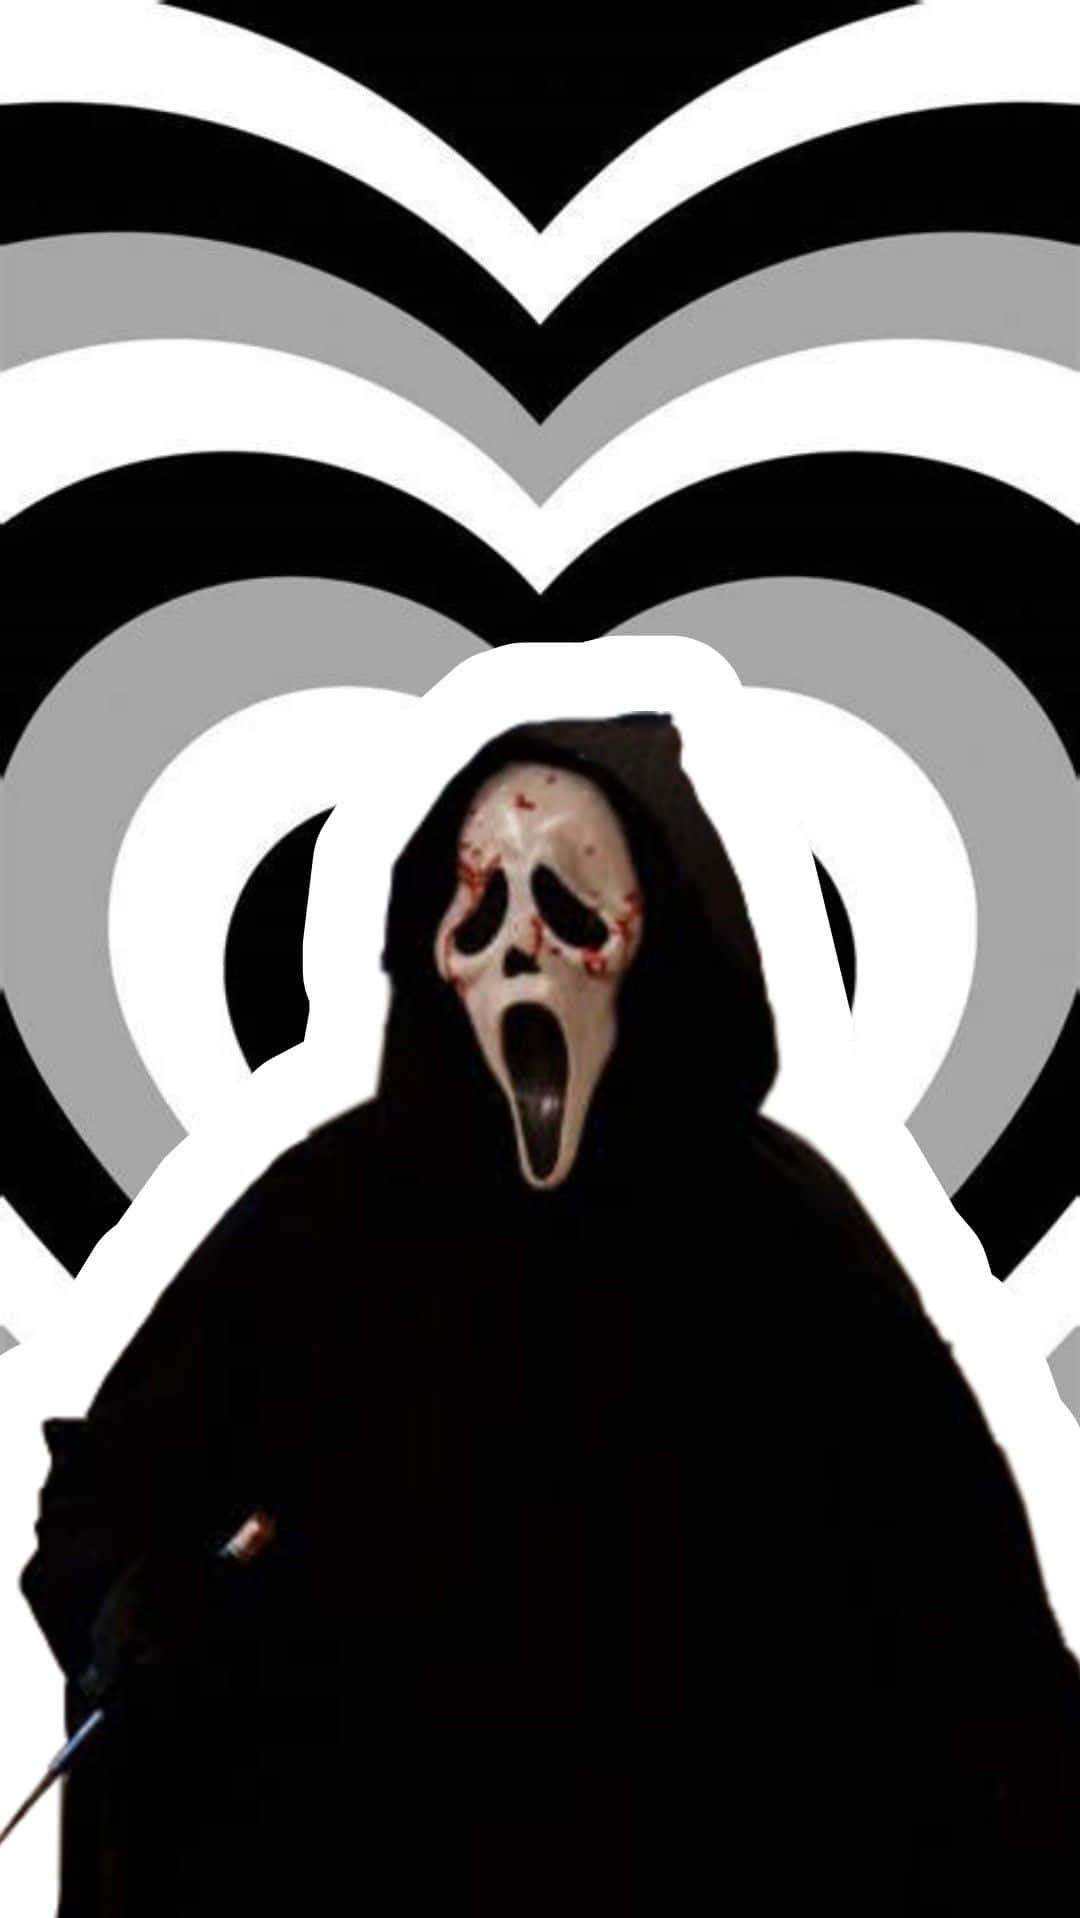 Scream ghostface wallpaper for iPhone and Android - Ghostface